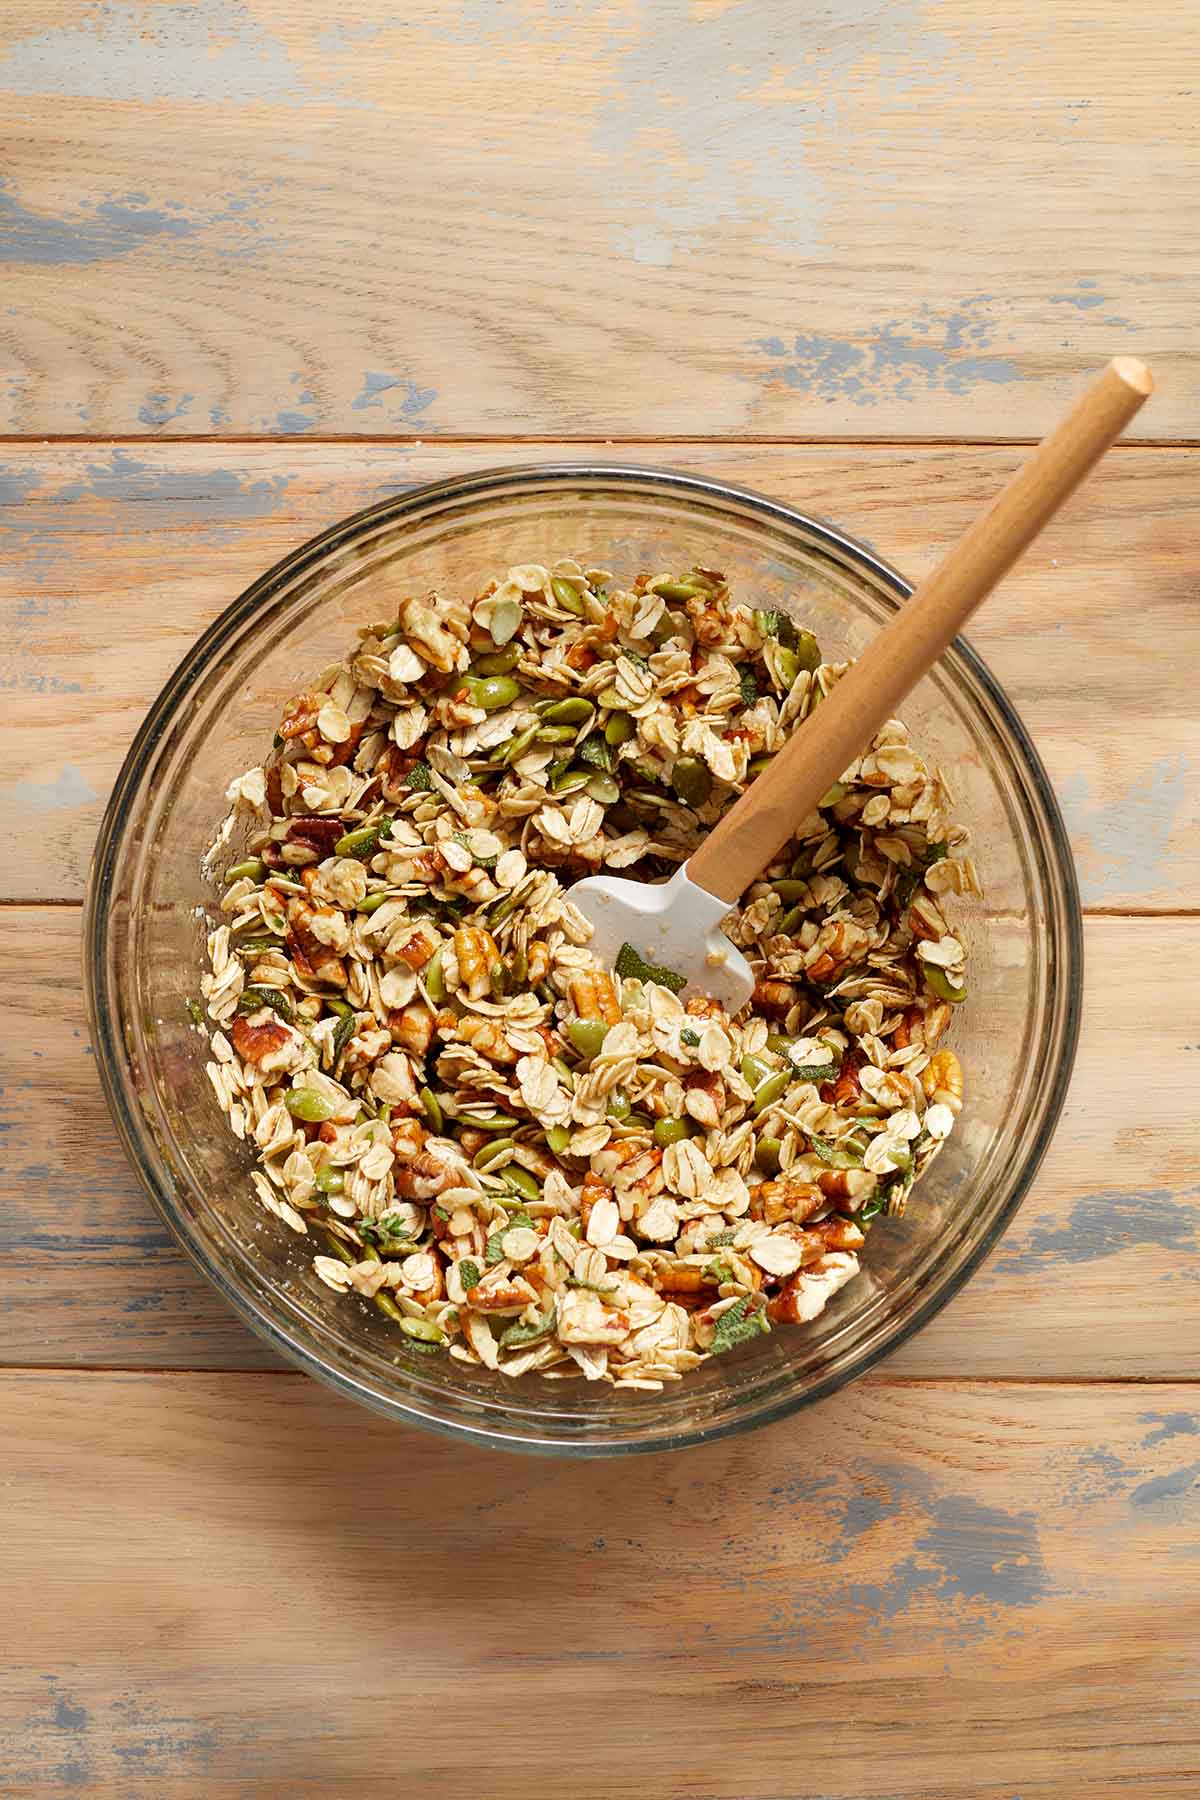 Granola ingredients mixed together in a glass bowl with a spatula.